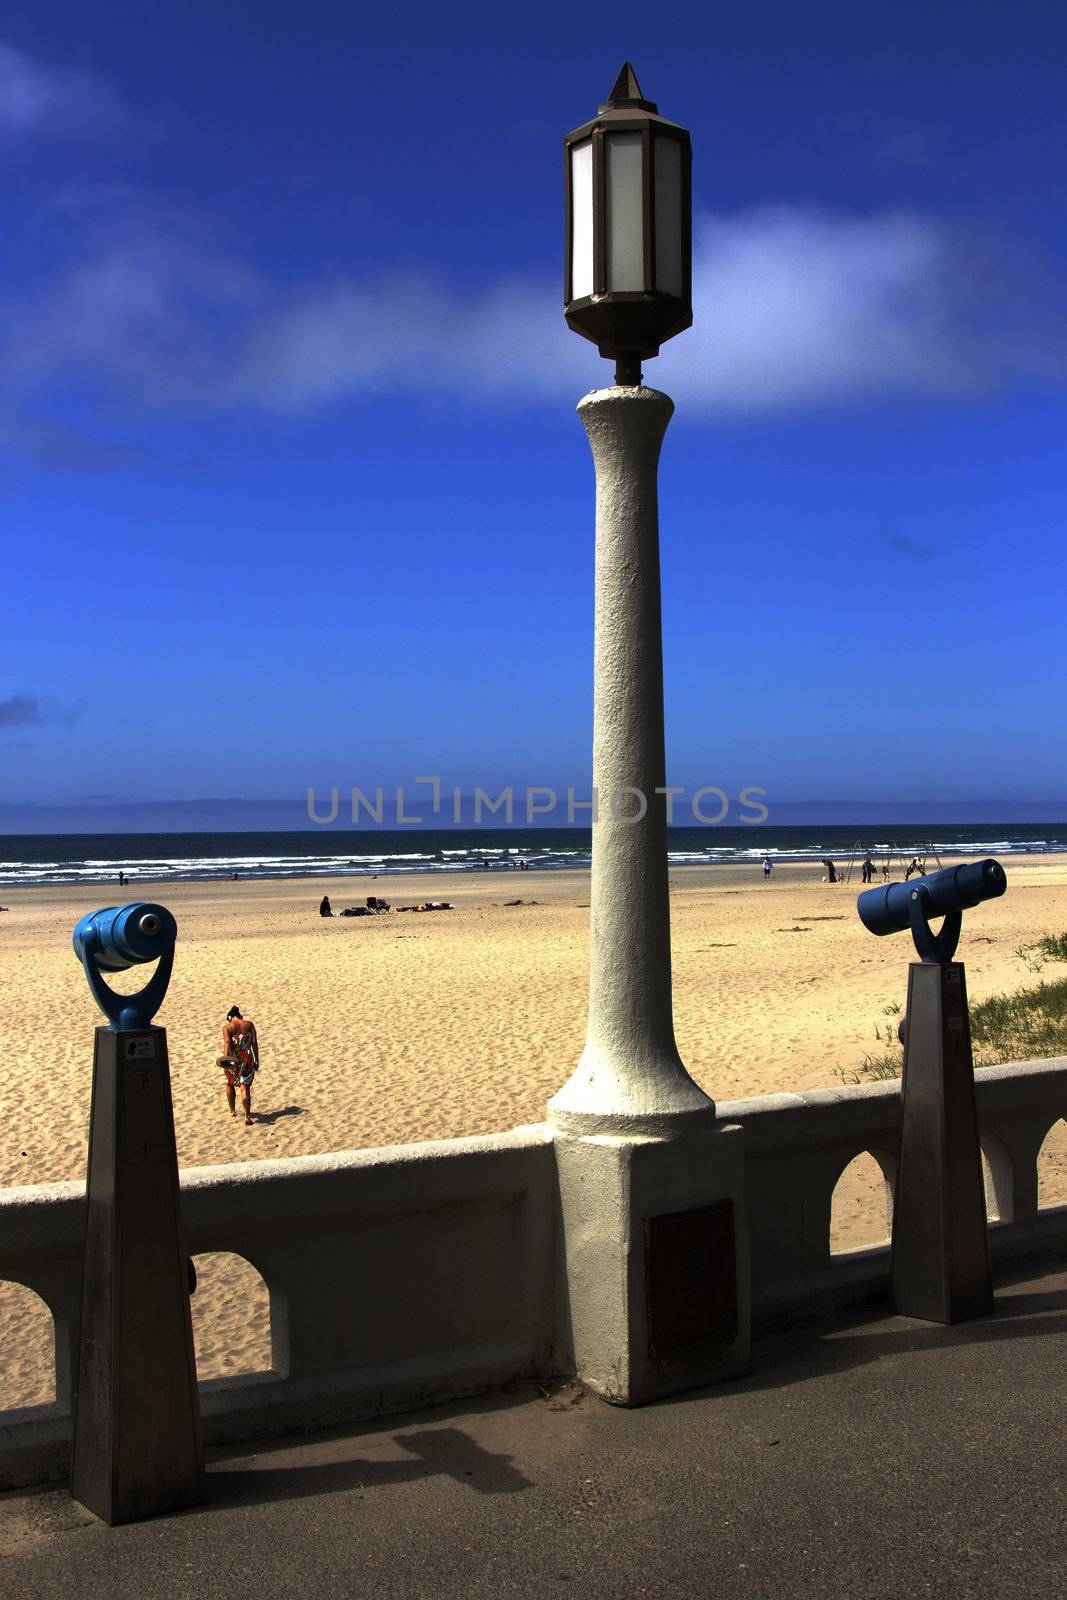 Monoculars and a light post overlooking the beach in Seasise OR.